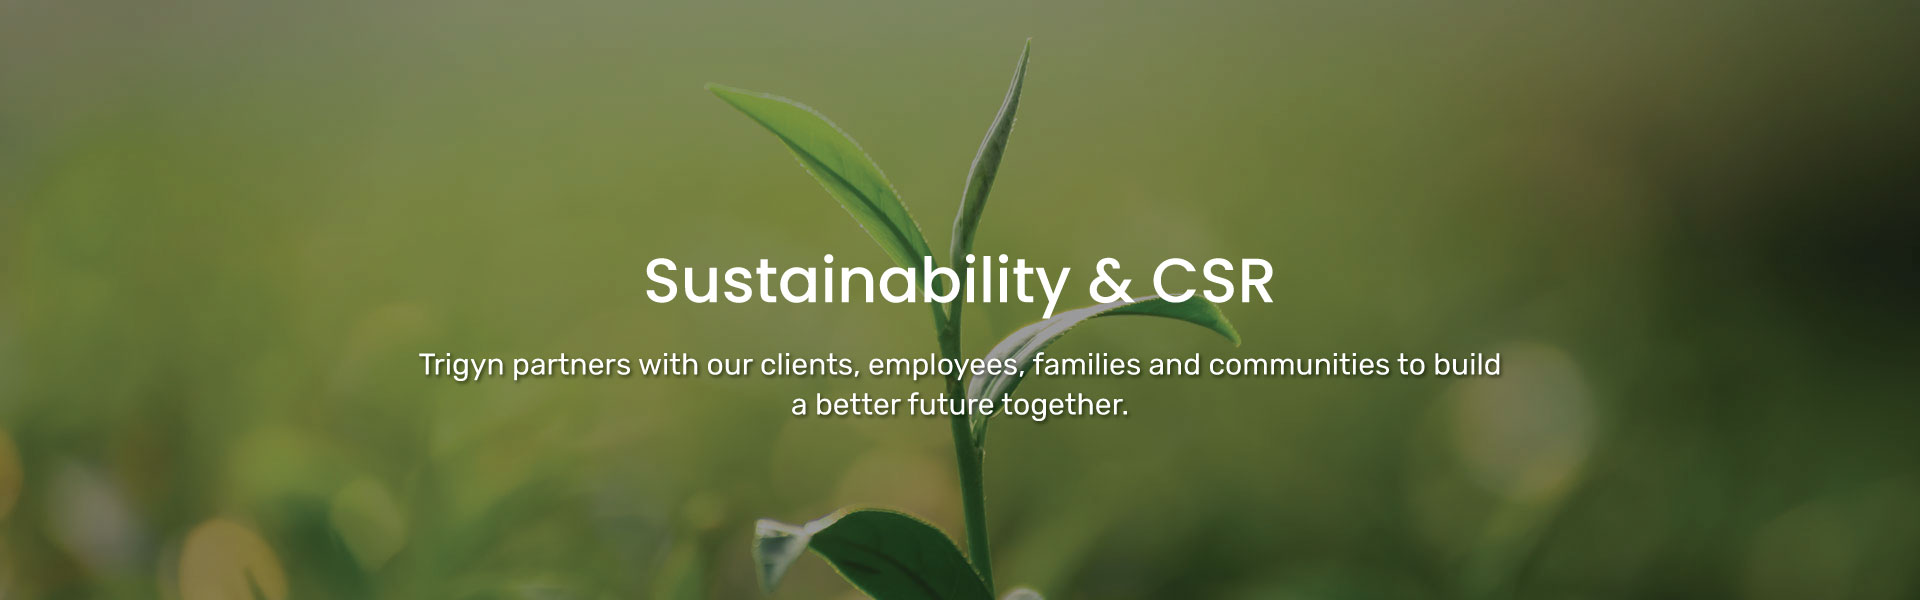 Trigyn’s Approach to Sustainability & Corporate Social Responsibility